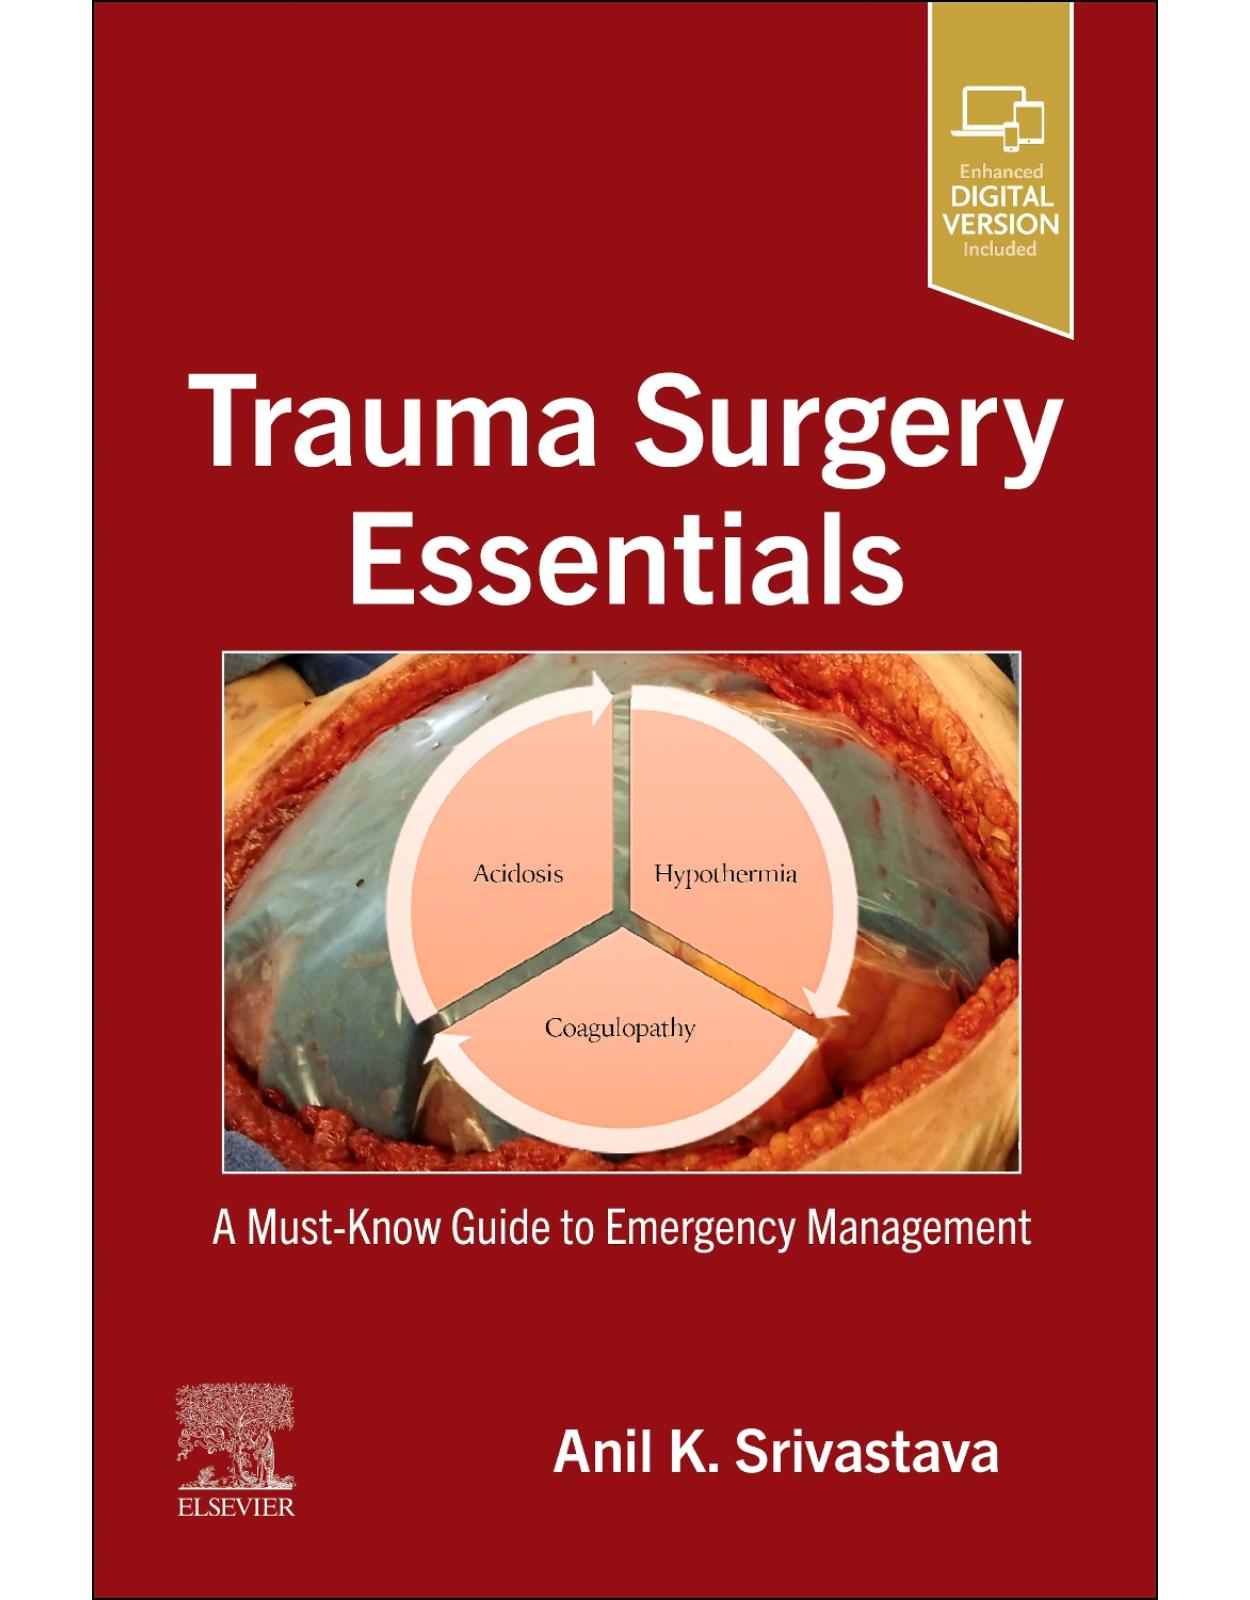 Trauma Surgery Essentials: A Must-Know Guide to Emergency Management